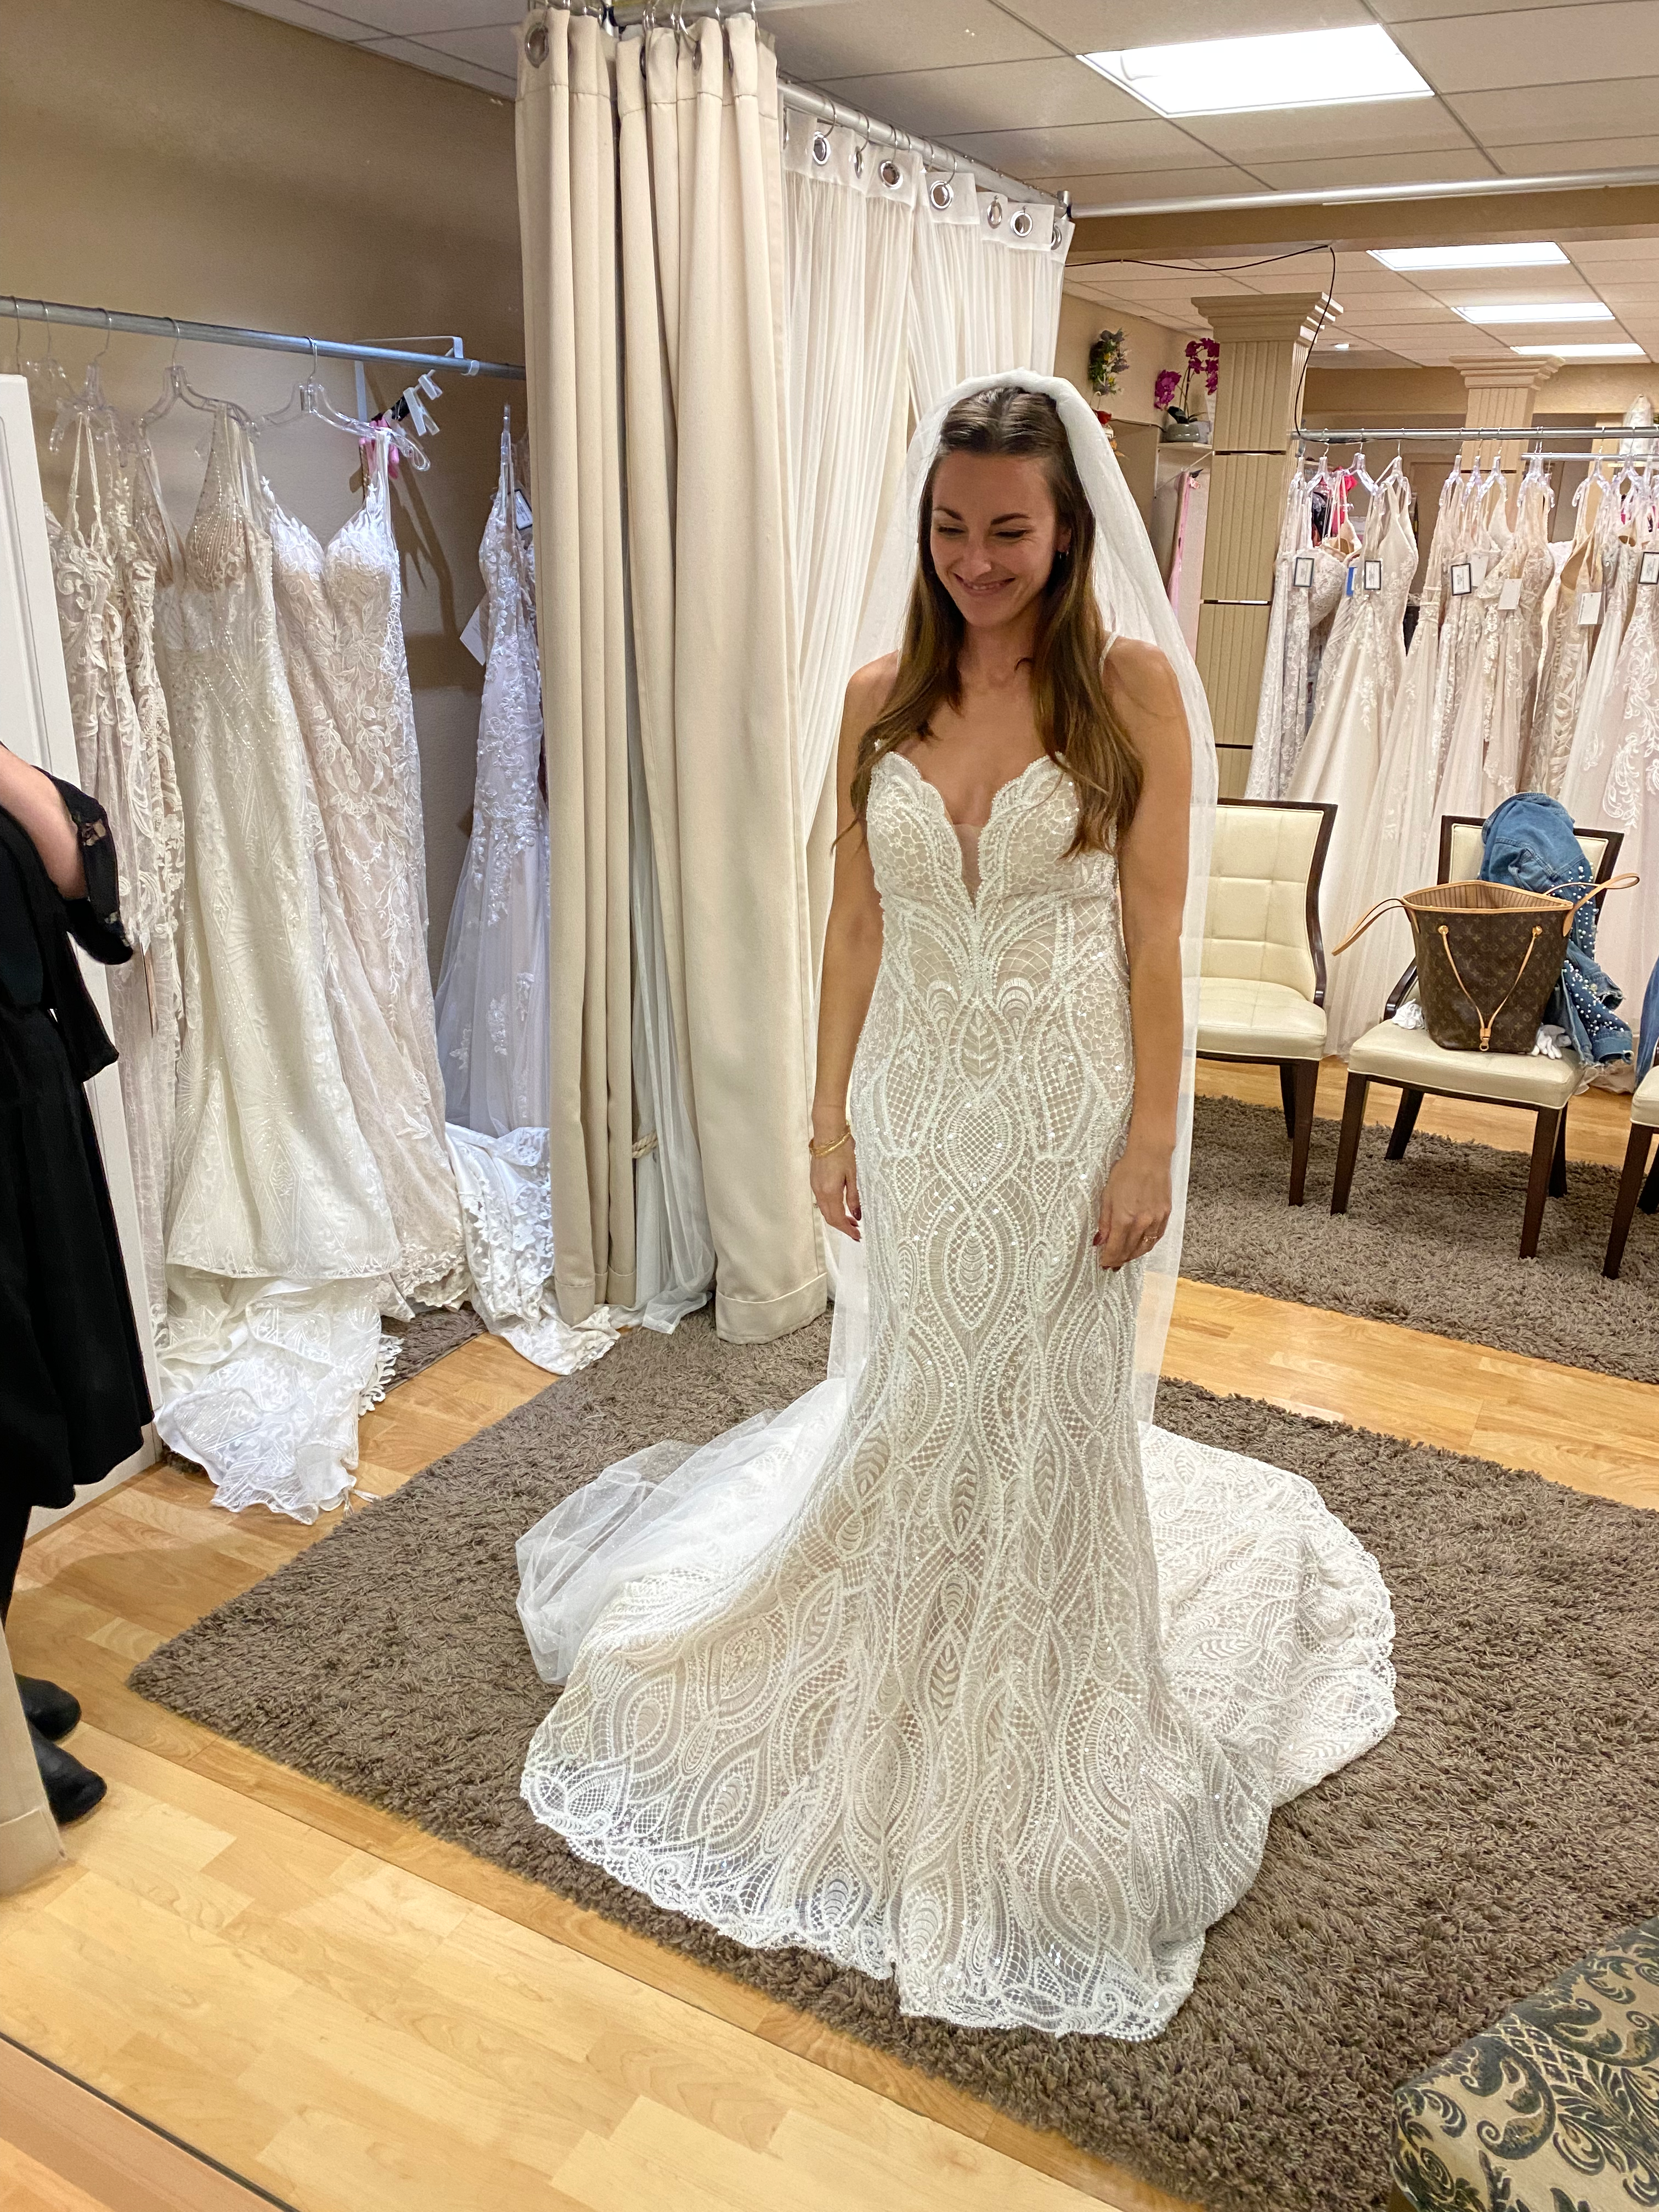 Tara in her wedding dress in a bridal boutique, looking in the mirror and smiling.